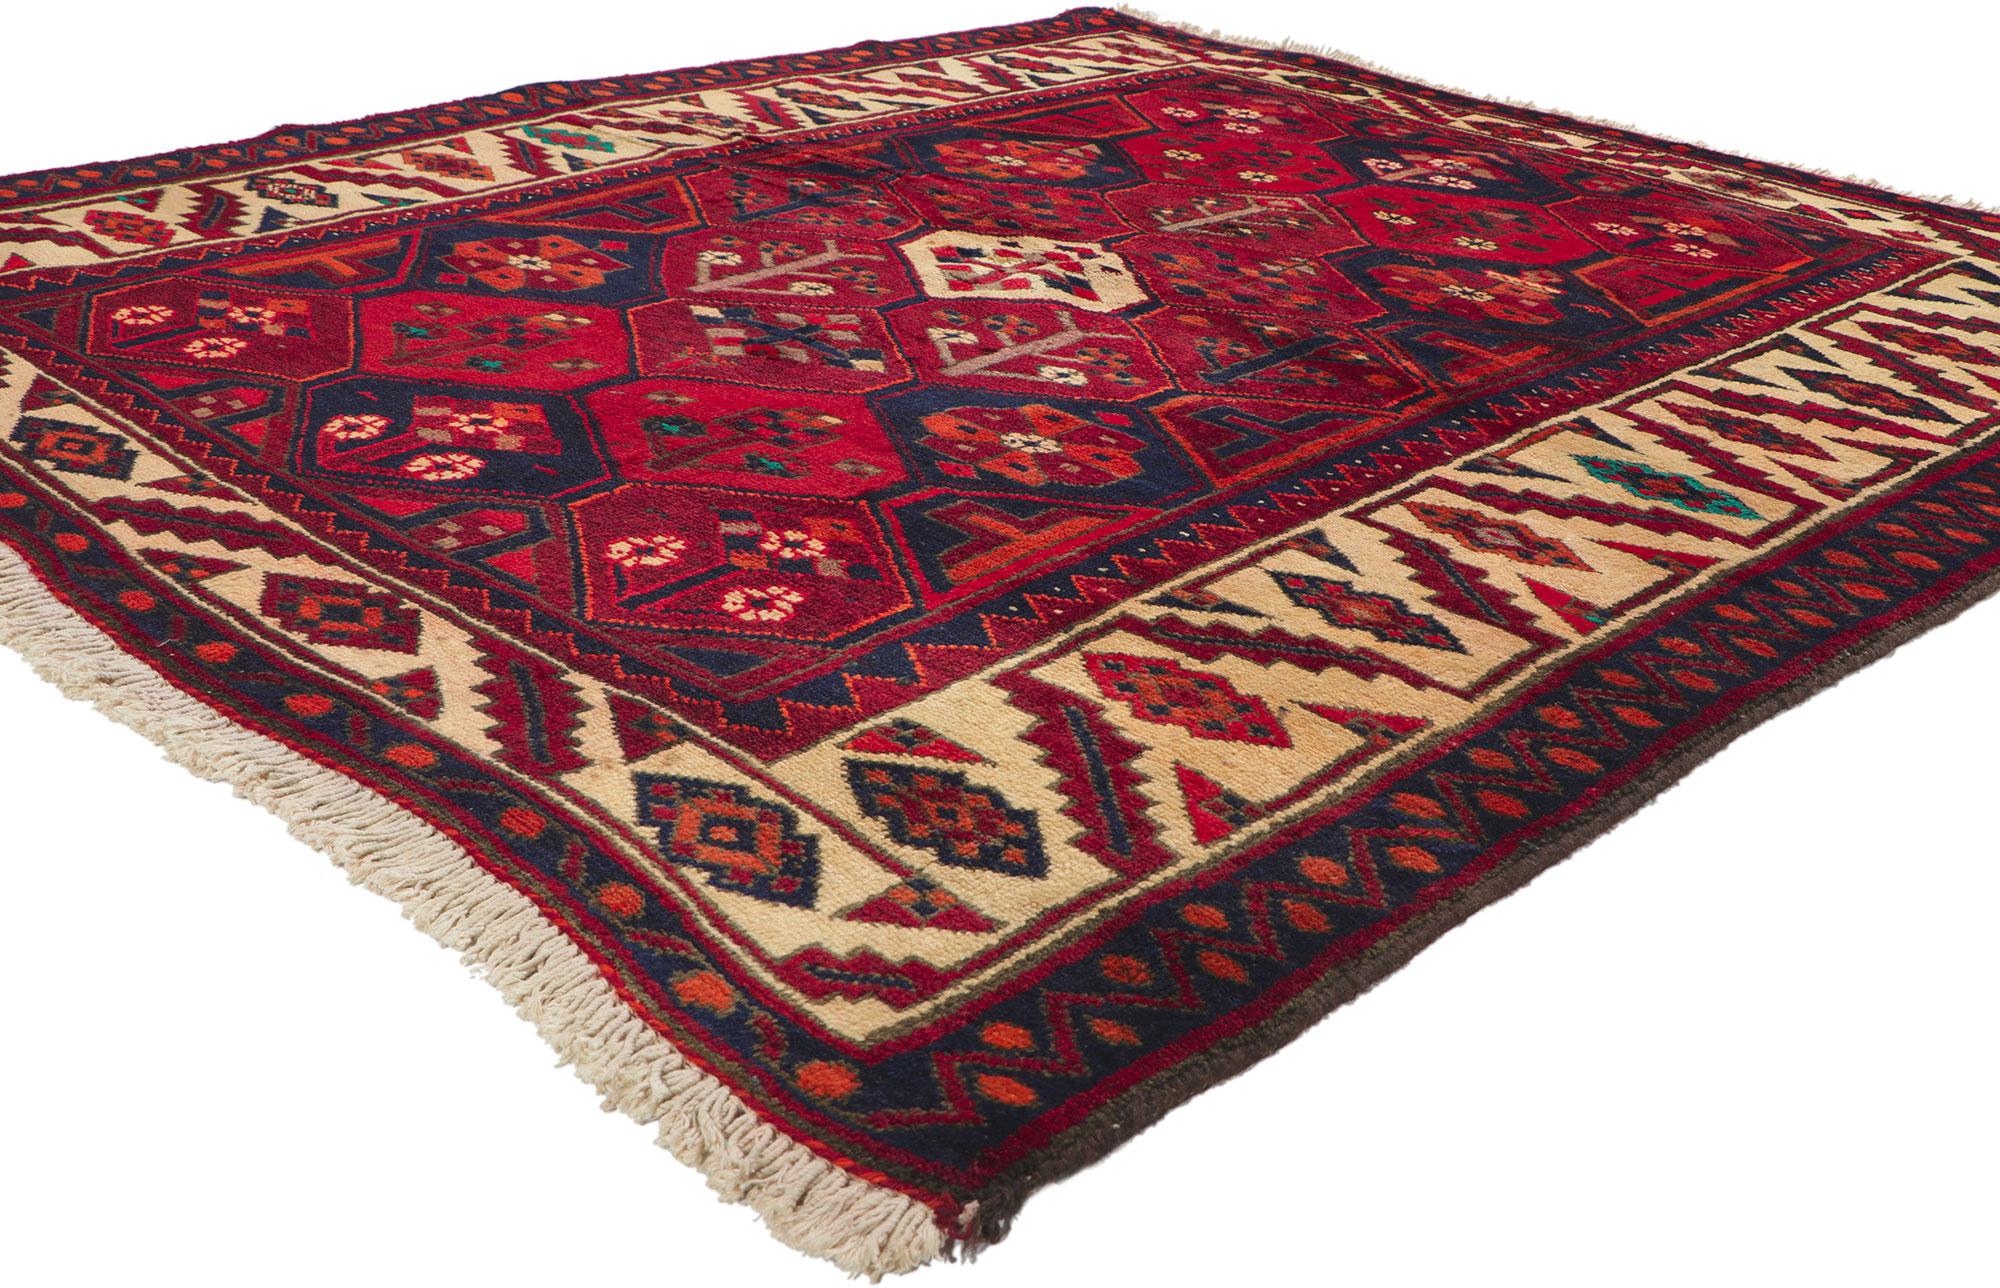 71284 Vintage Persian Bakhtiari Rug with Garden Design and Manor House Tudor Style. This is a vintage hand-knotted wool Persian Bakhtiari rug featuring an ornate centre medallion with an all-over geometric and floral pattern surrounded by a